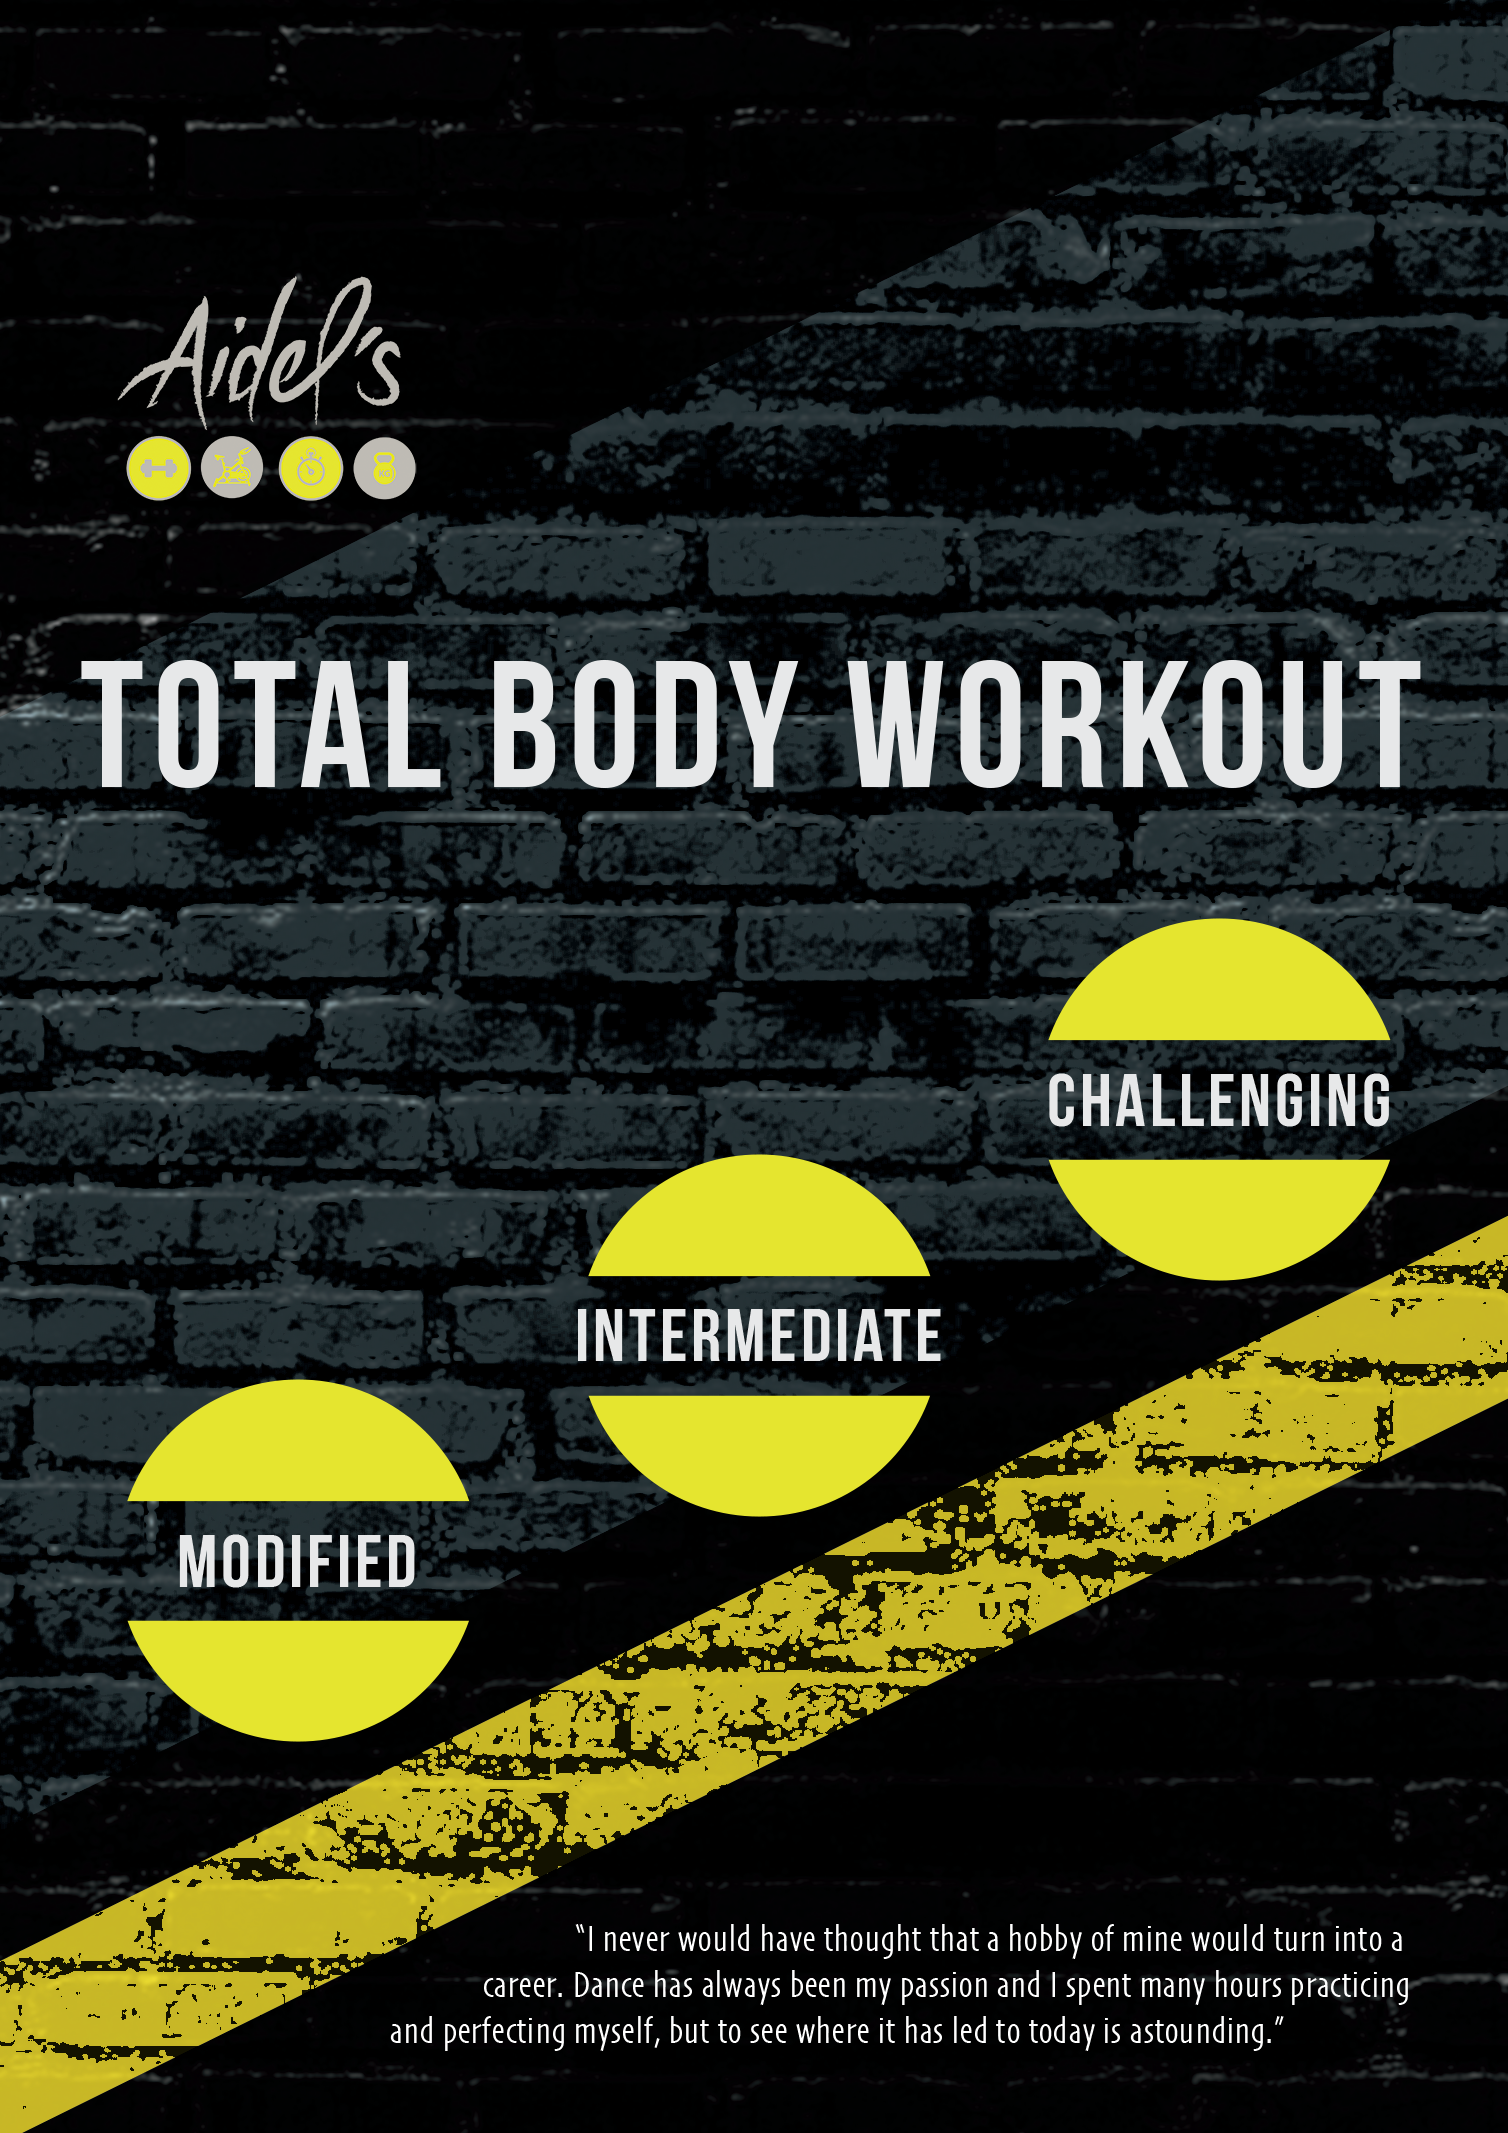 Aidel's Gym - Total Body Workout